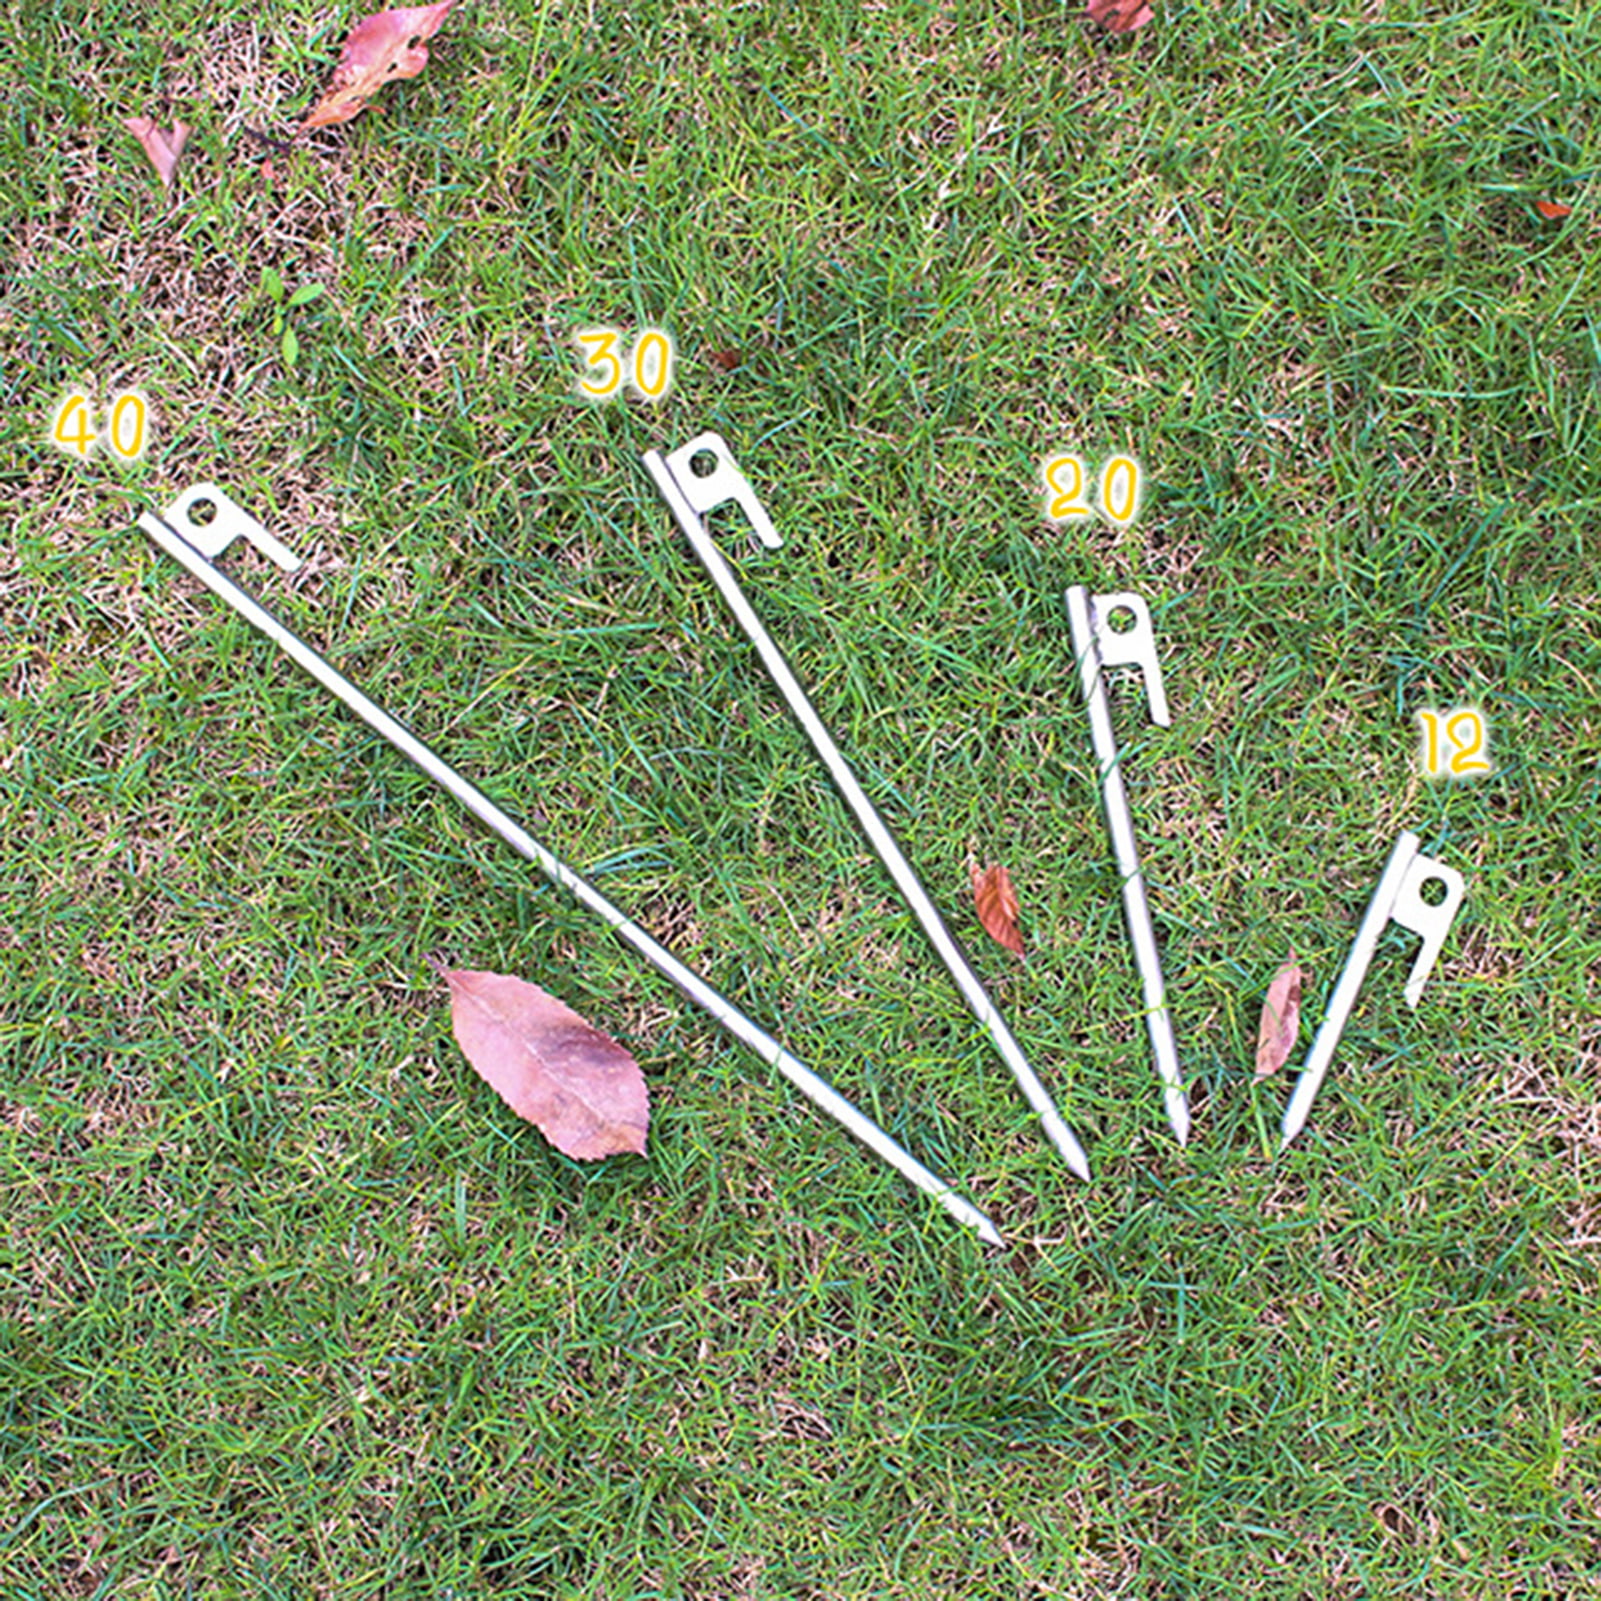 4DAB Adjustable Aluminum Alloy Tent Peg Stake 18cm Ultralight Camping Tent Acces 